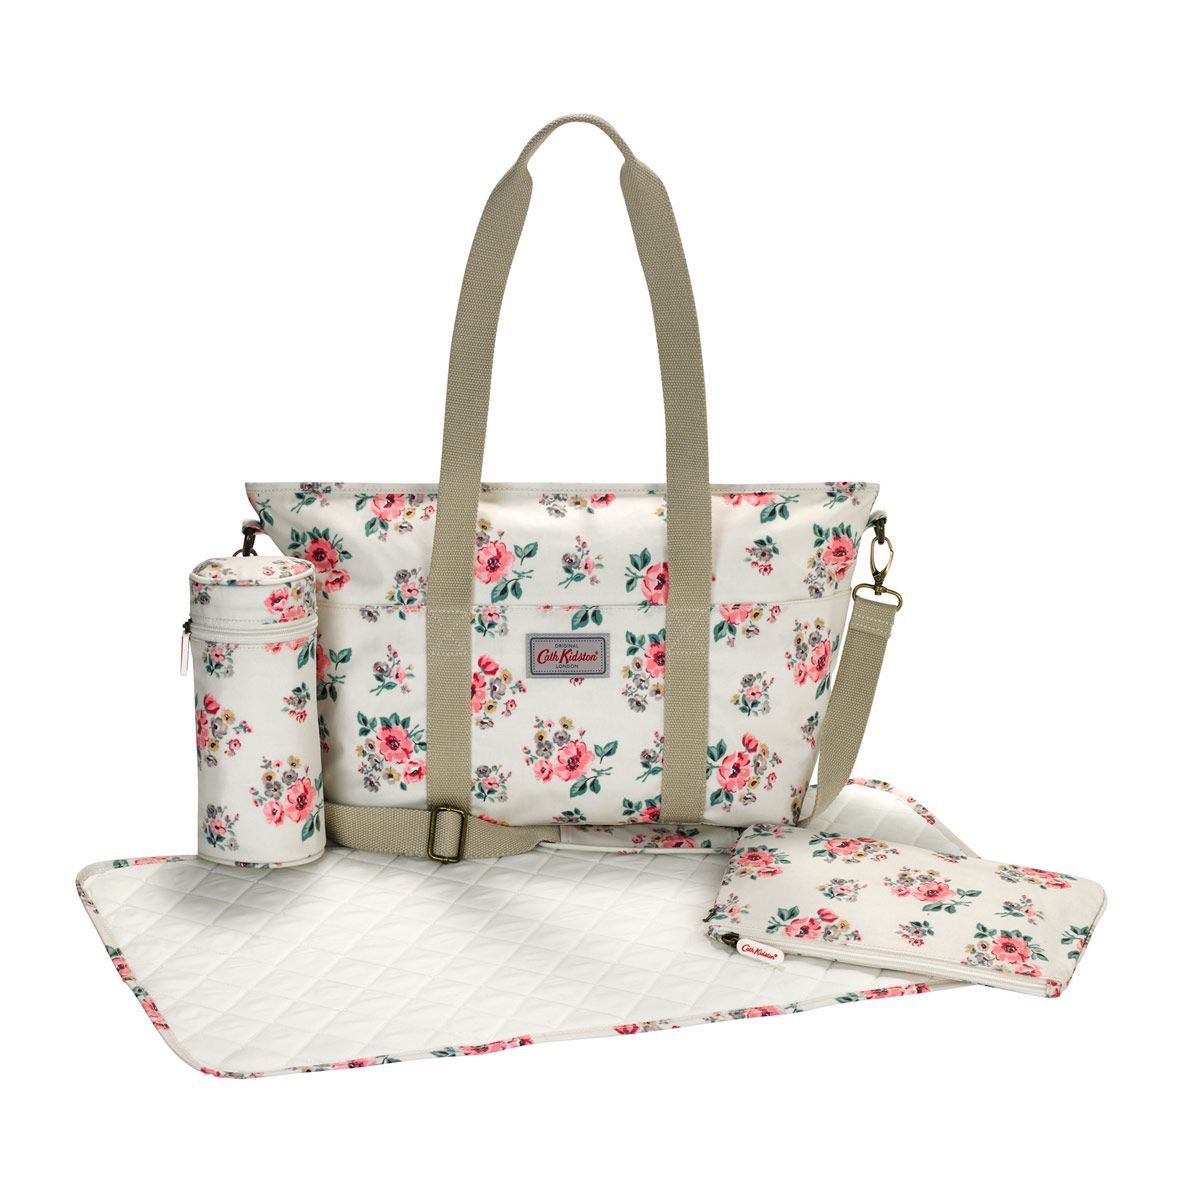 Cath Kidston Mother's Tote Bag Grove 